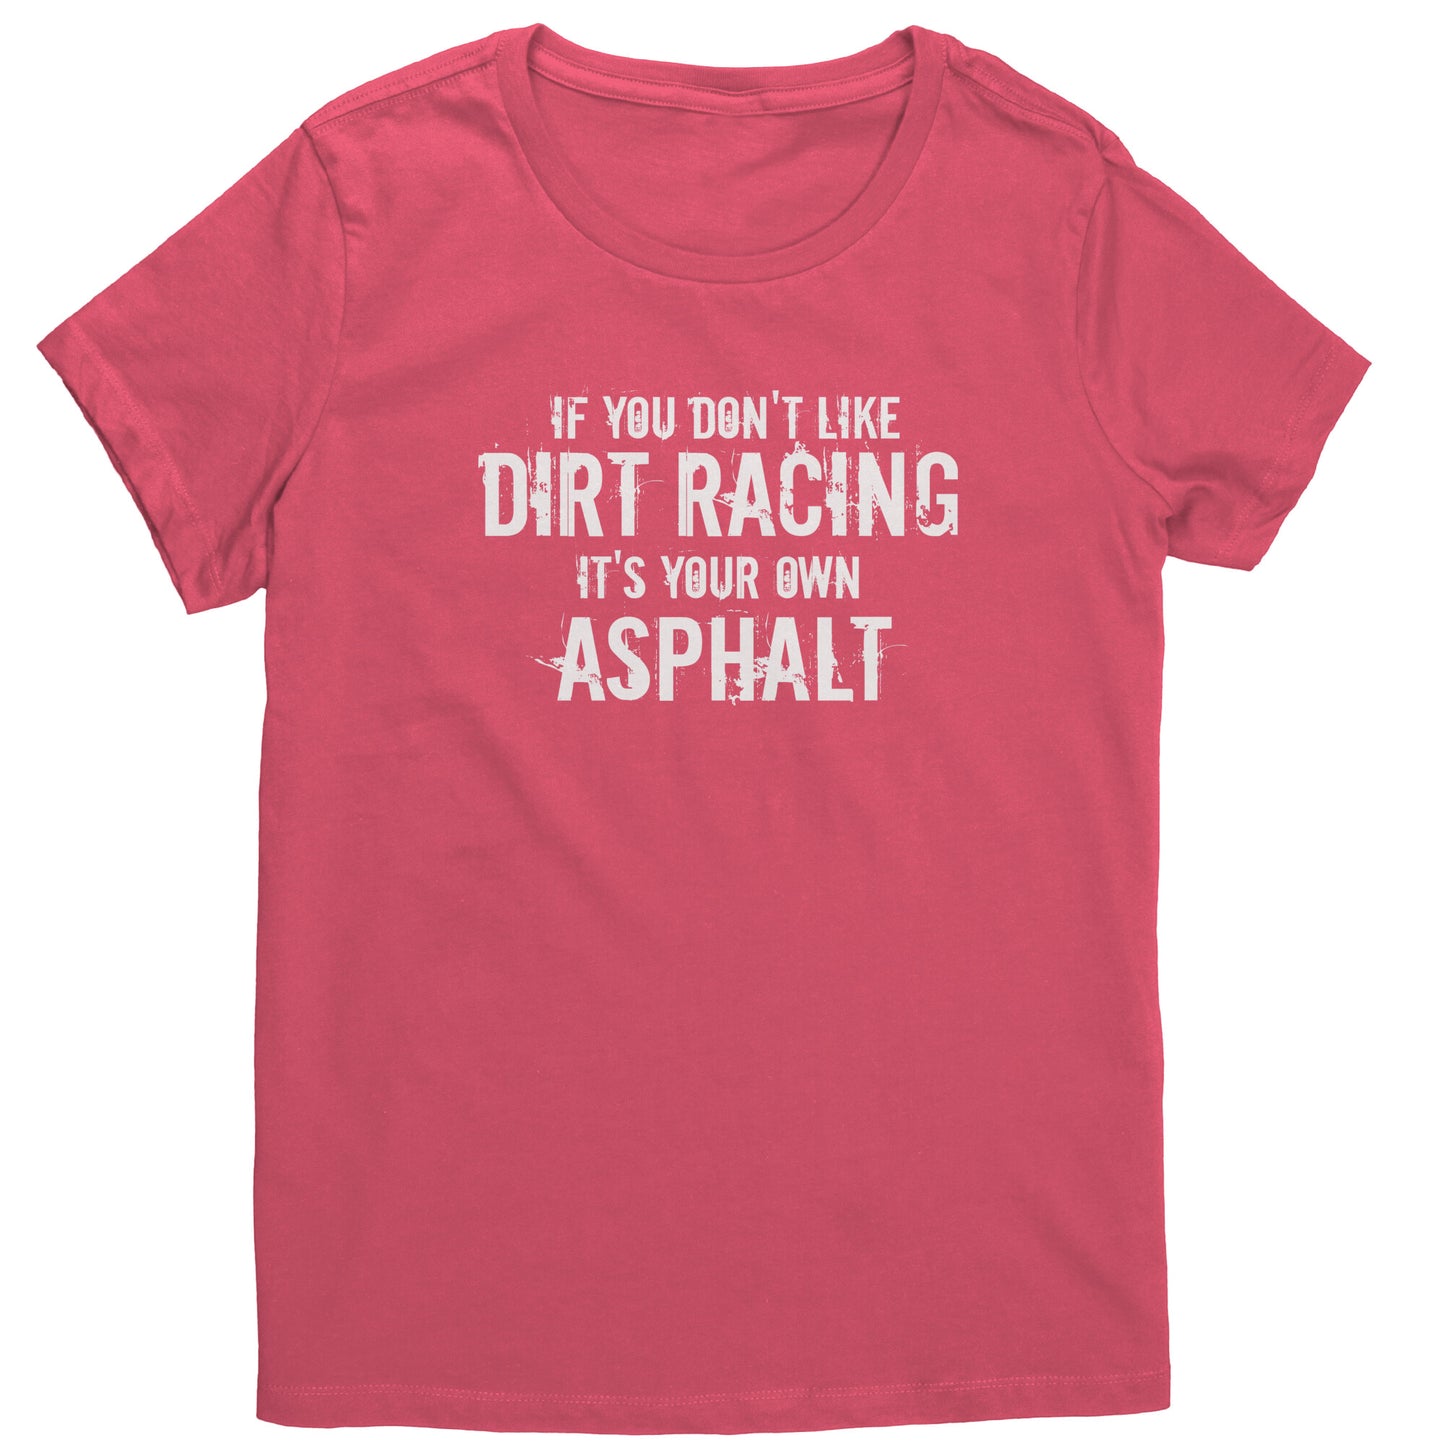 If You Don't Like Dirt Racing It's Your Own Asphalt T-Shirt